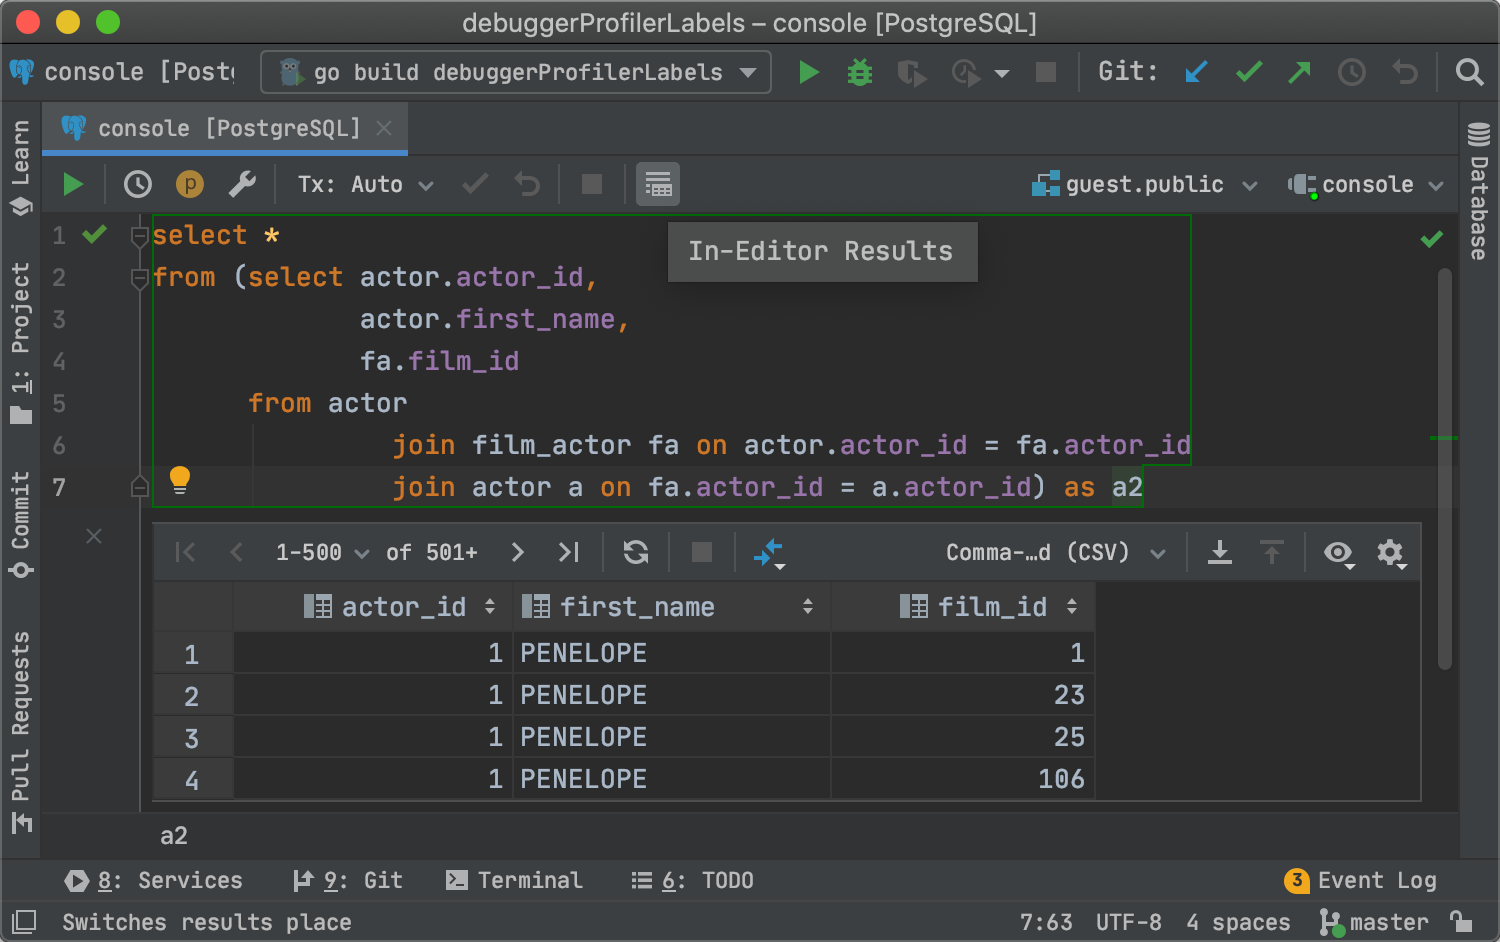 The results are displayed the code editor.